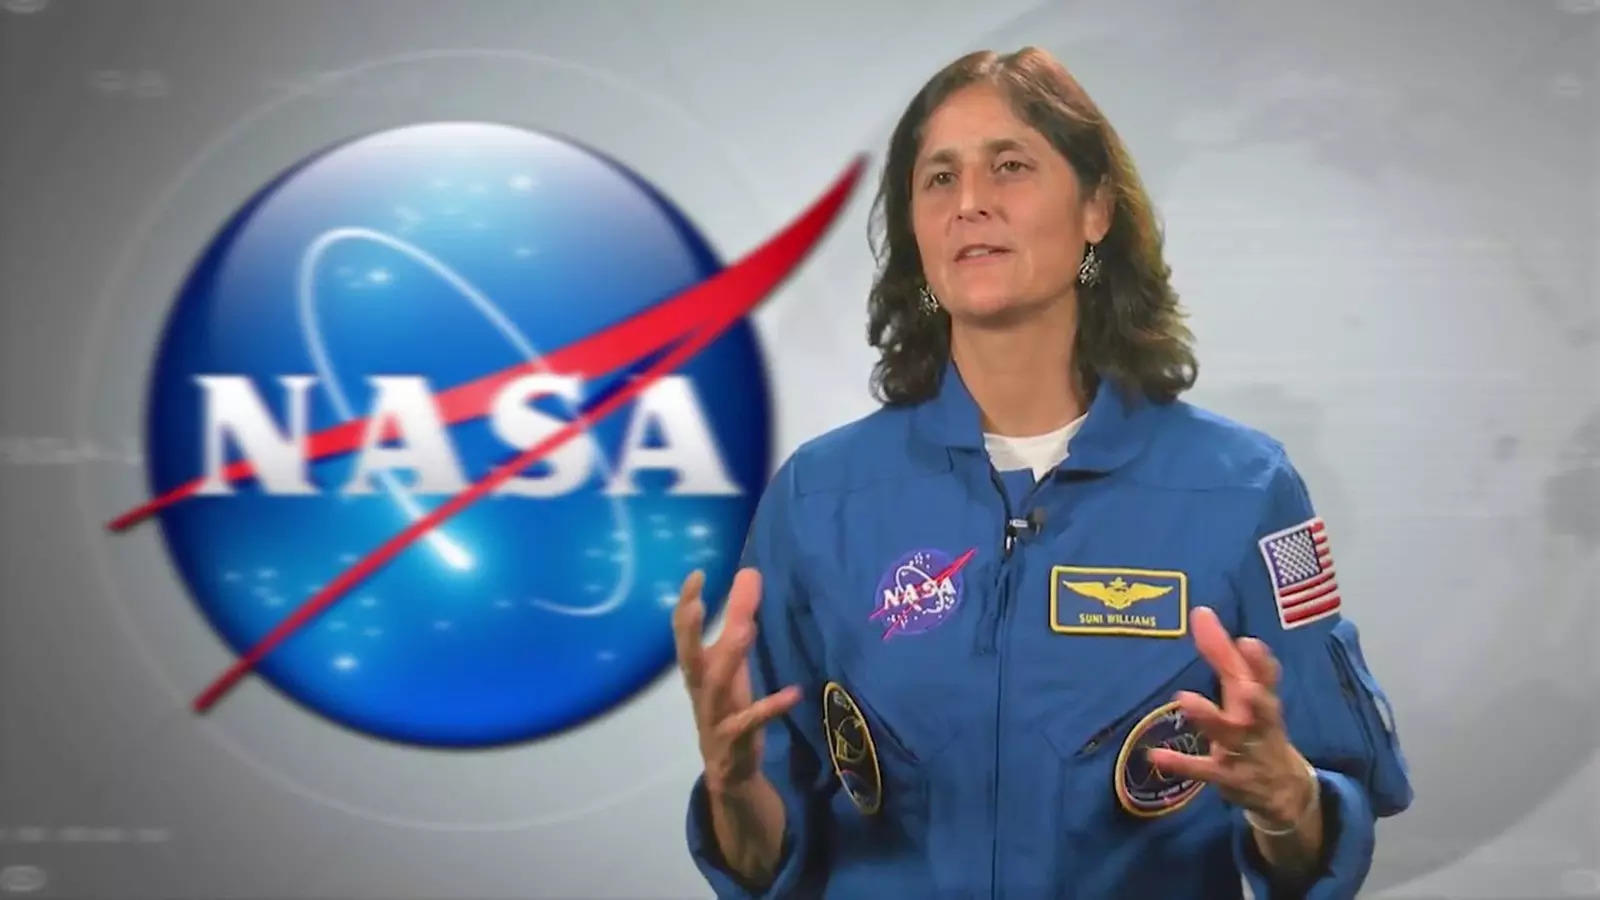 Sunita Williams Education: Who is Sunita Williams? She became an astronaut after studying so much